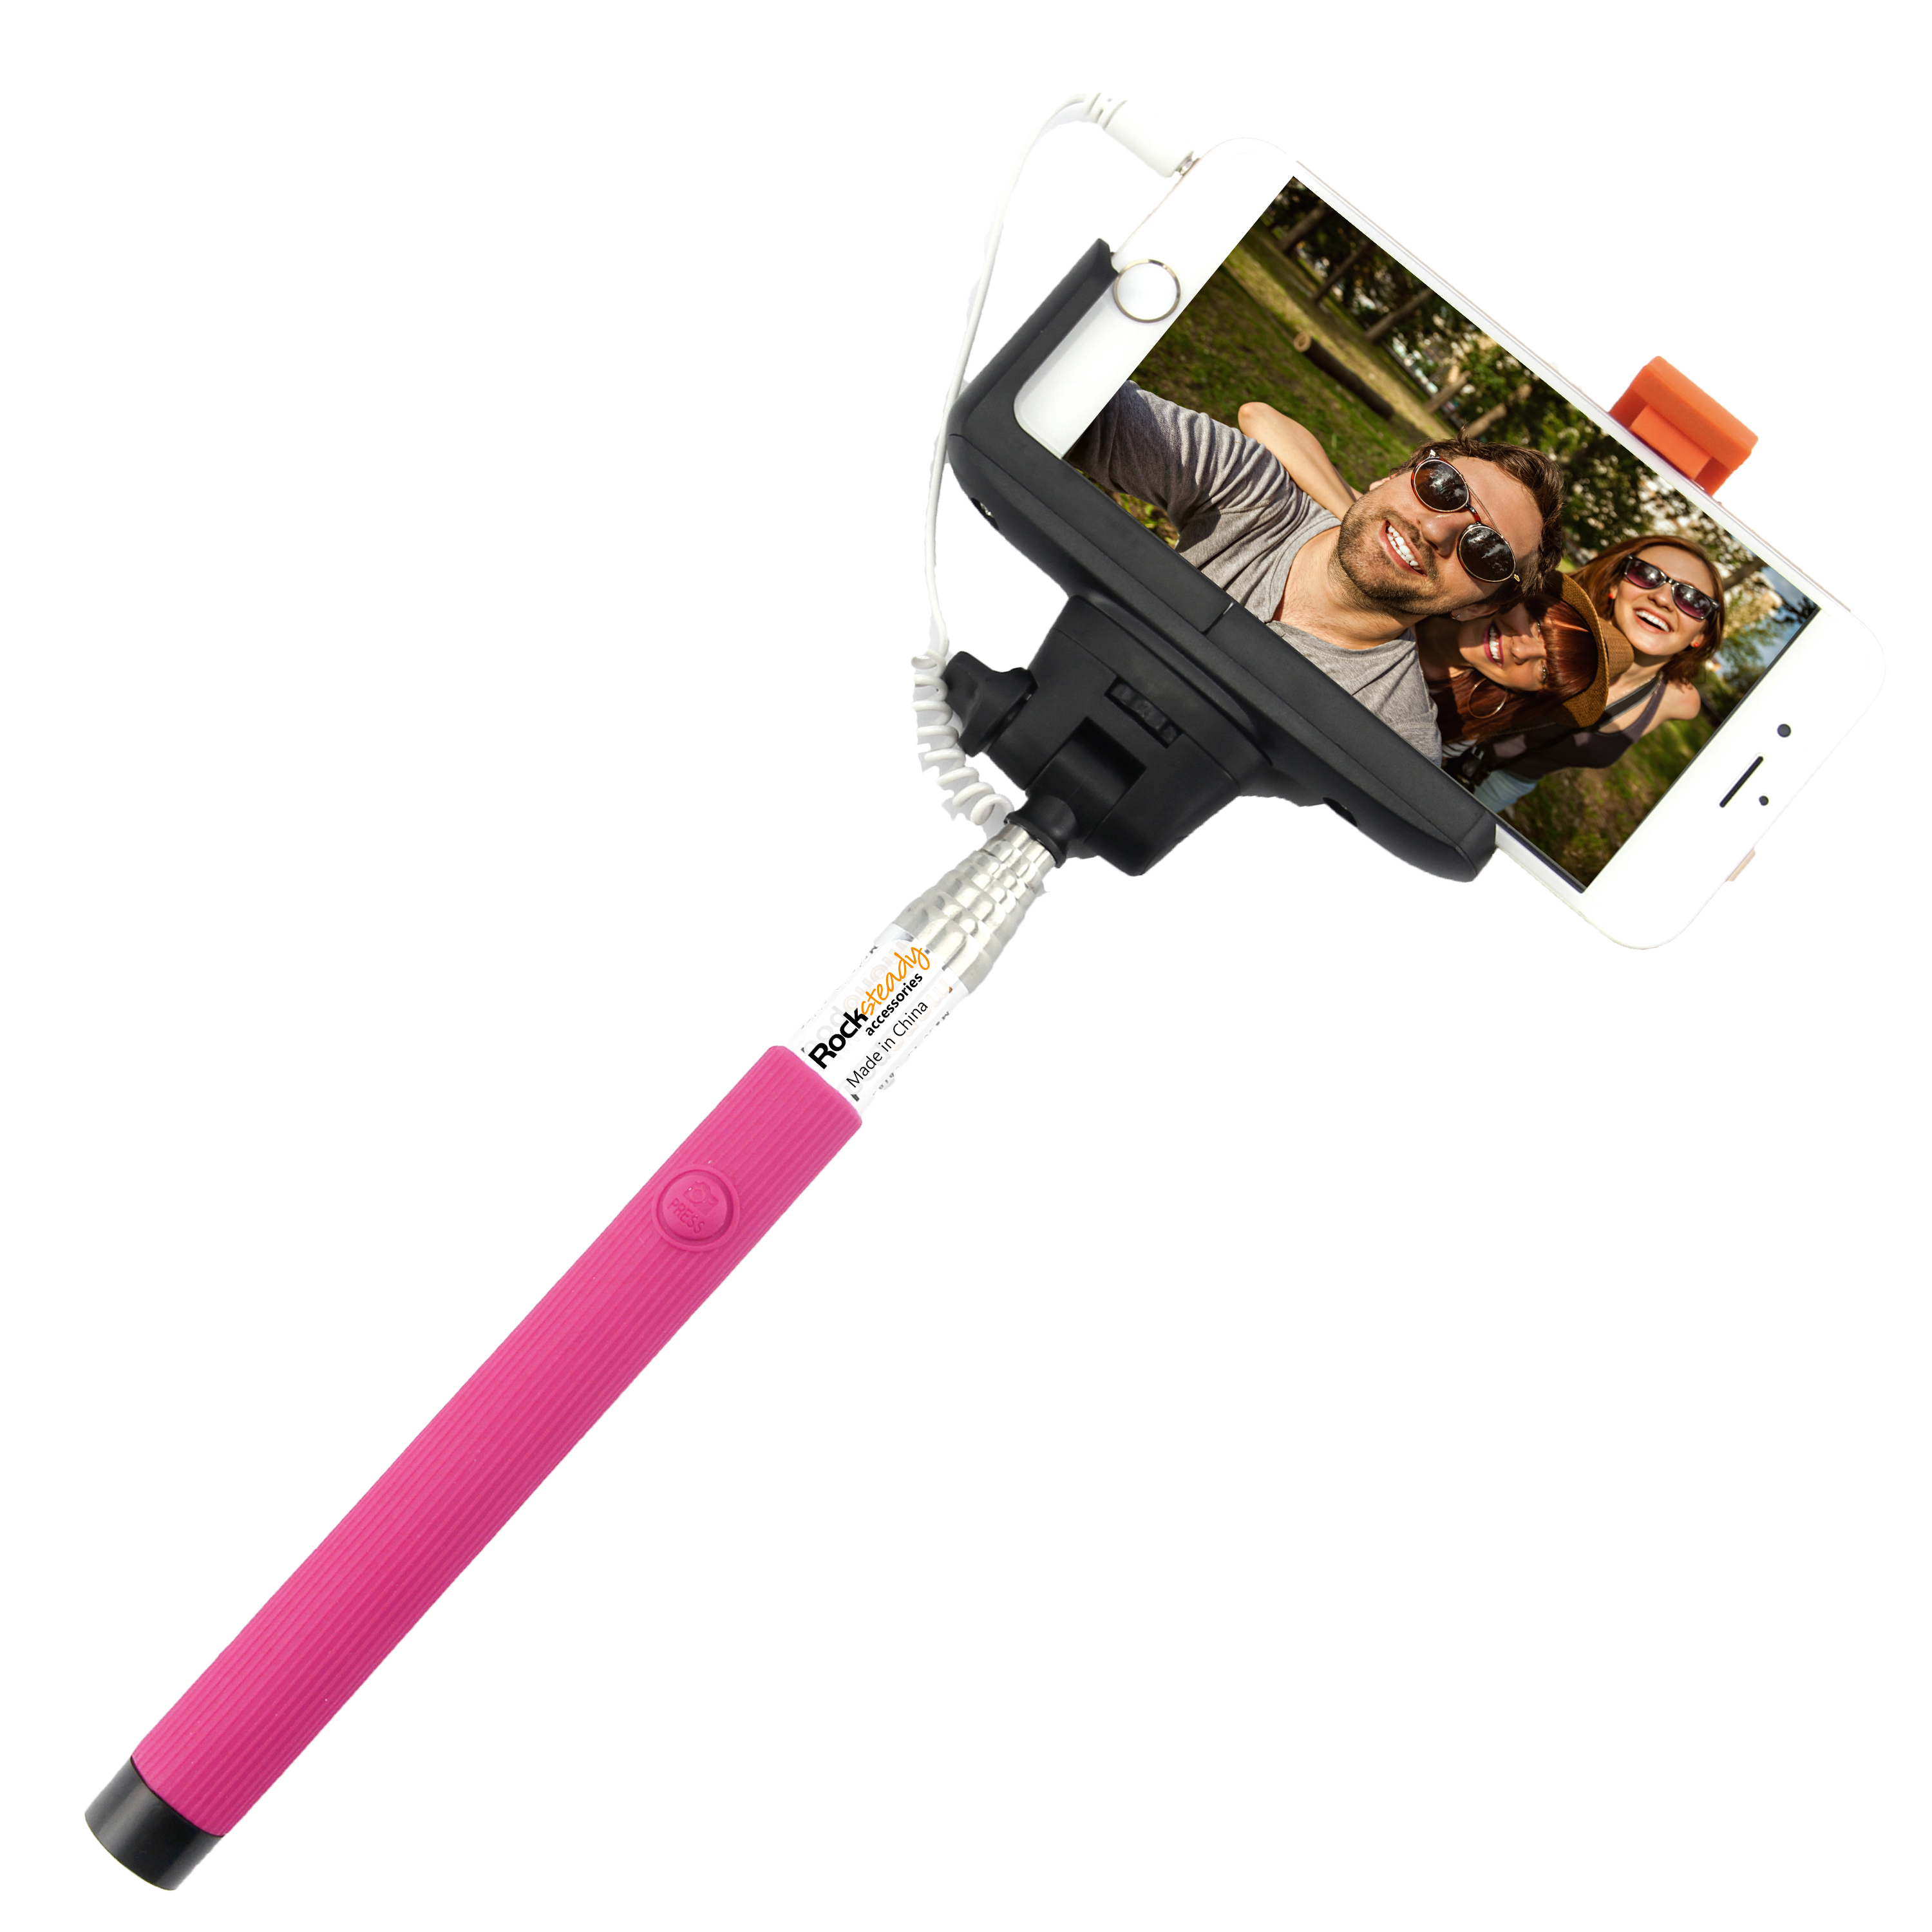 Rocksteady Selfie-WRD-Pink Wired Selfie Stick with Wired Control Pink